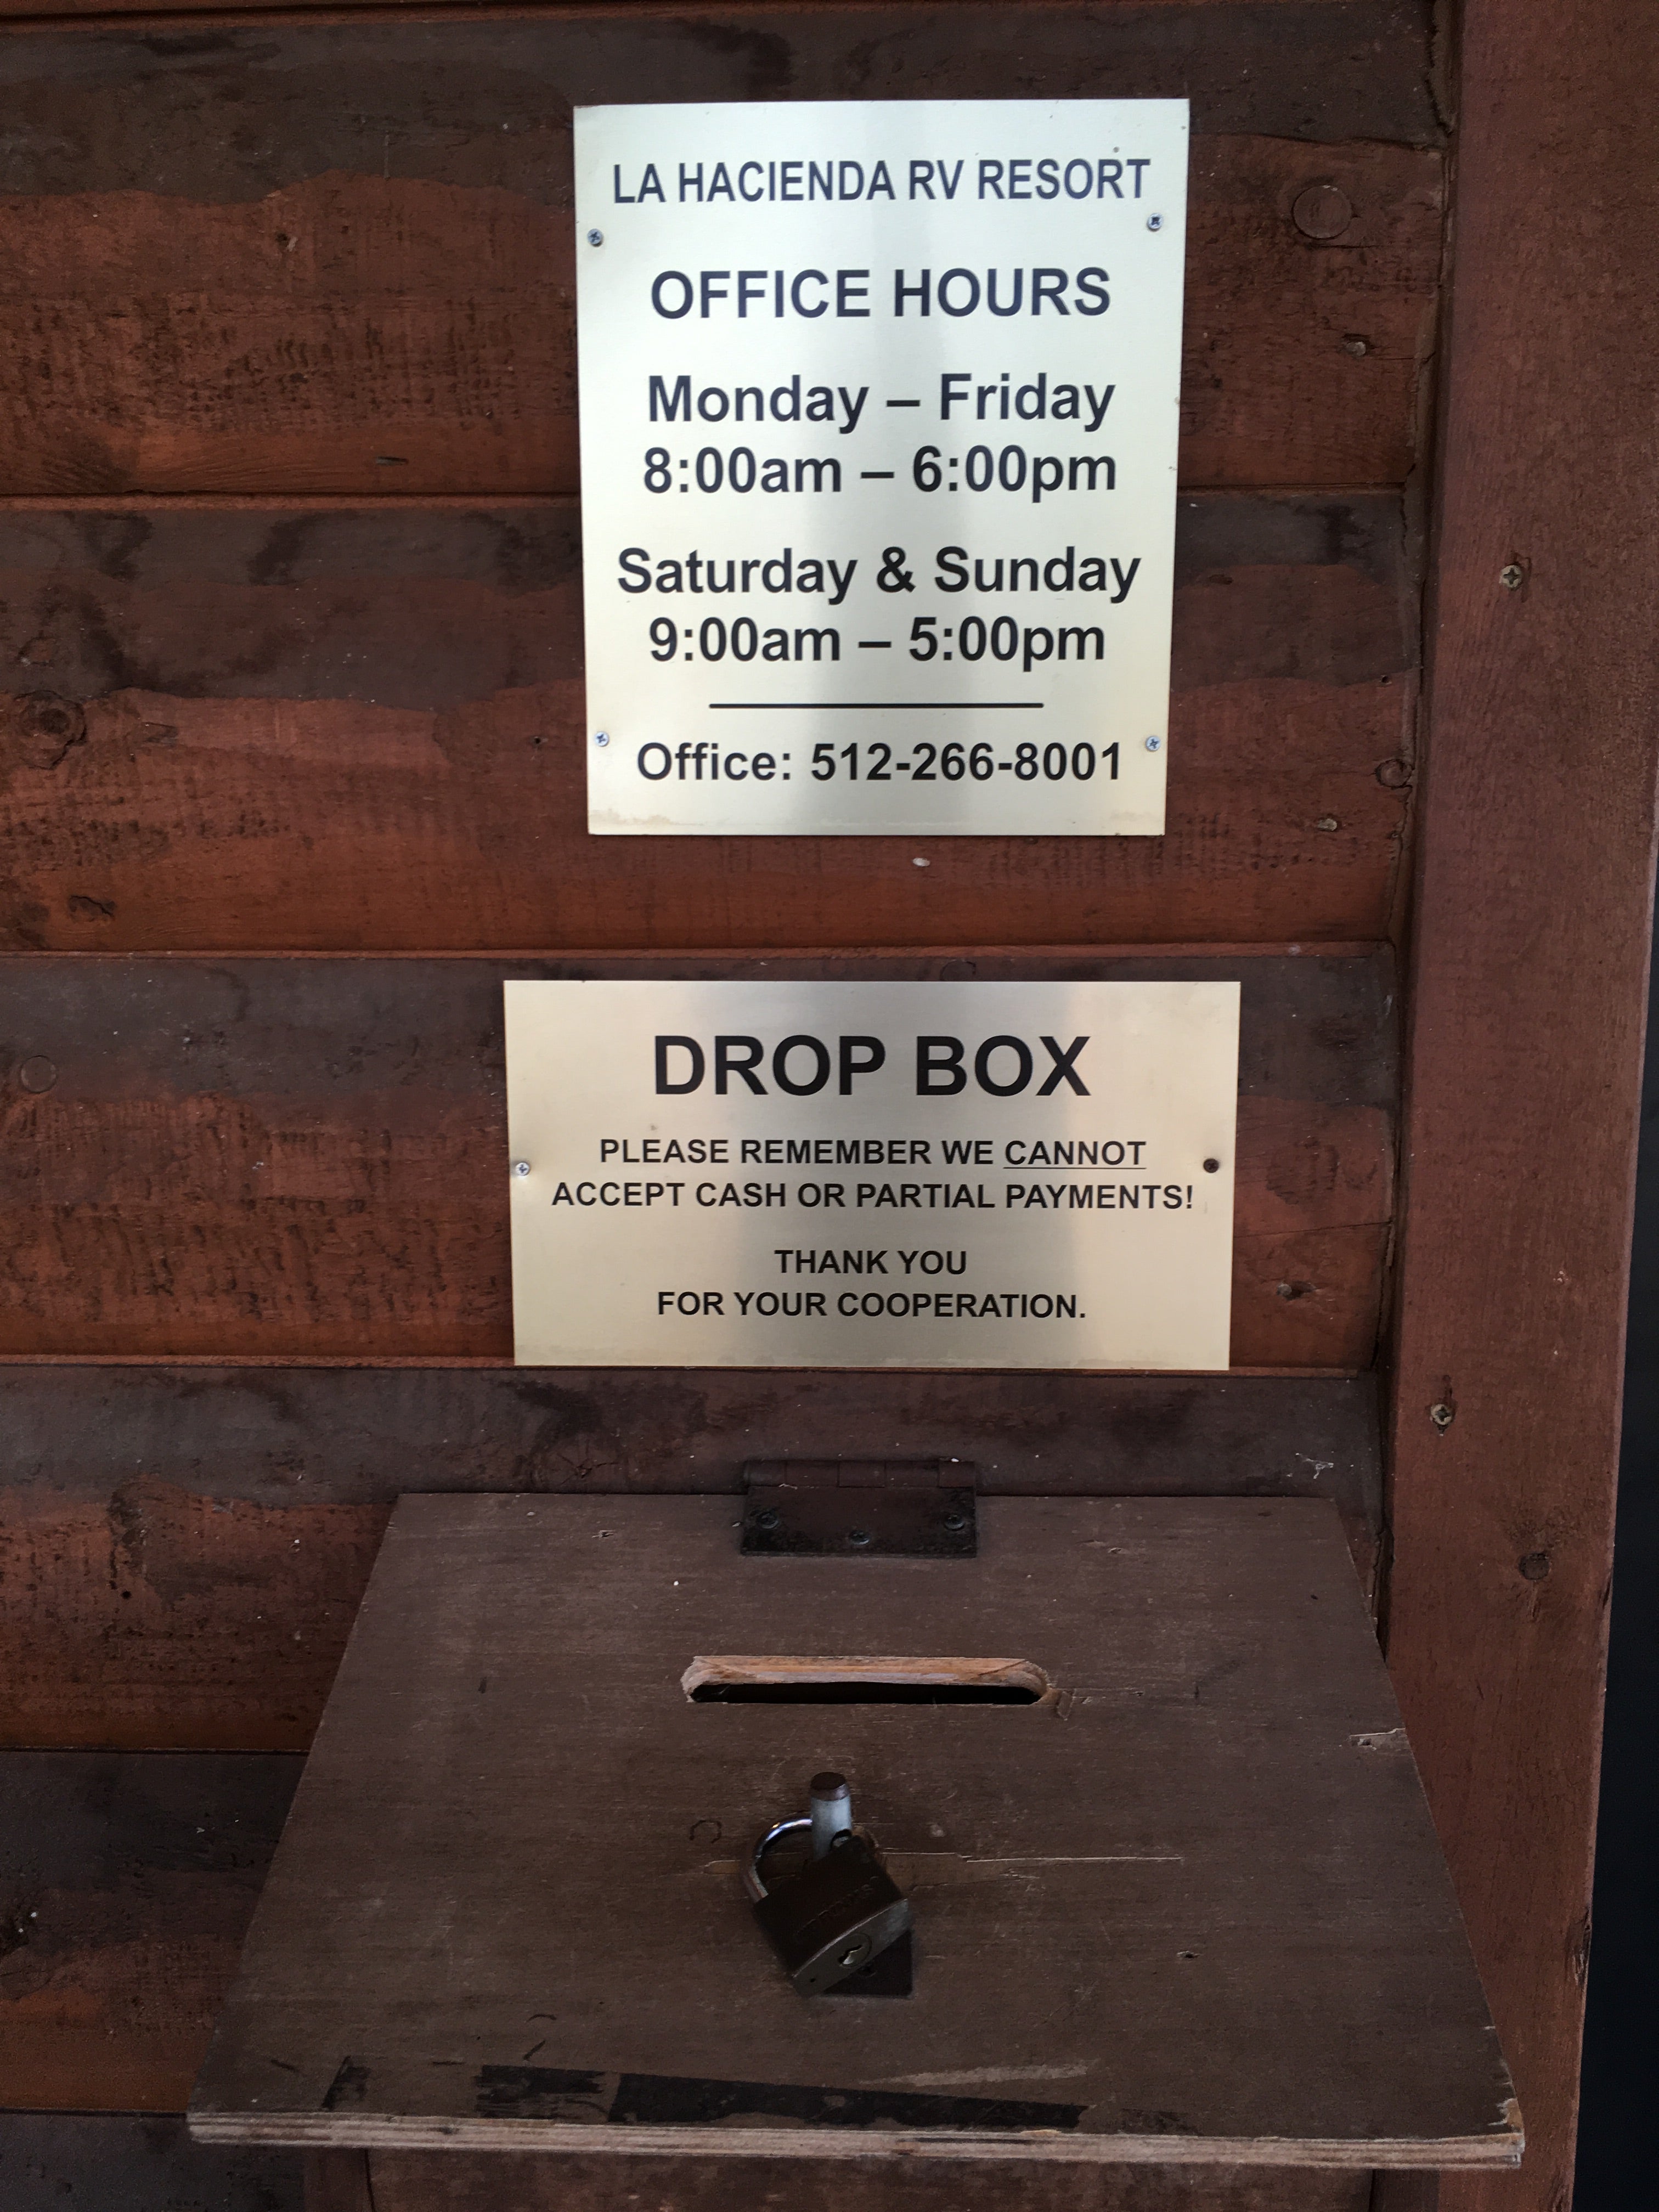 After hour drop box